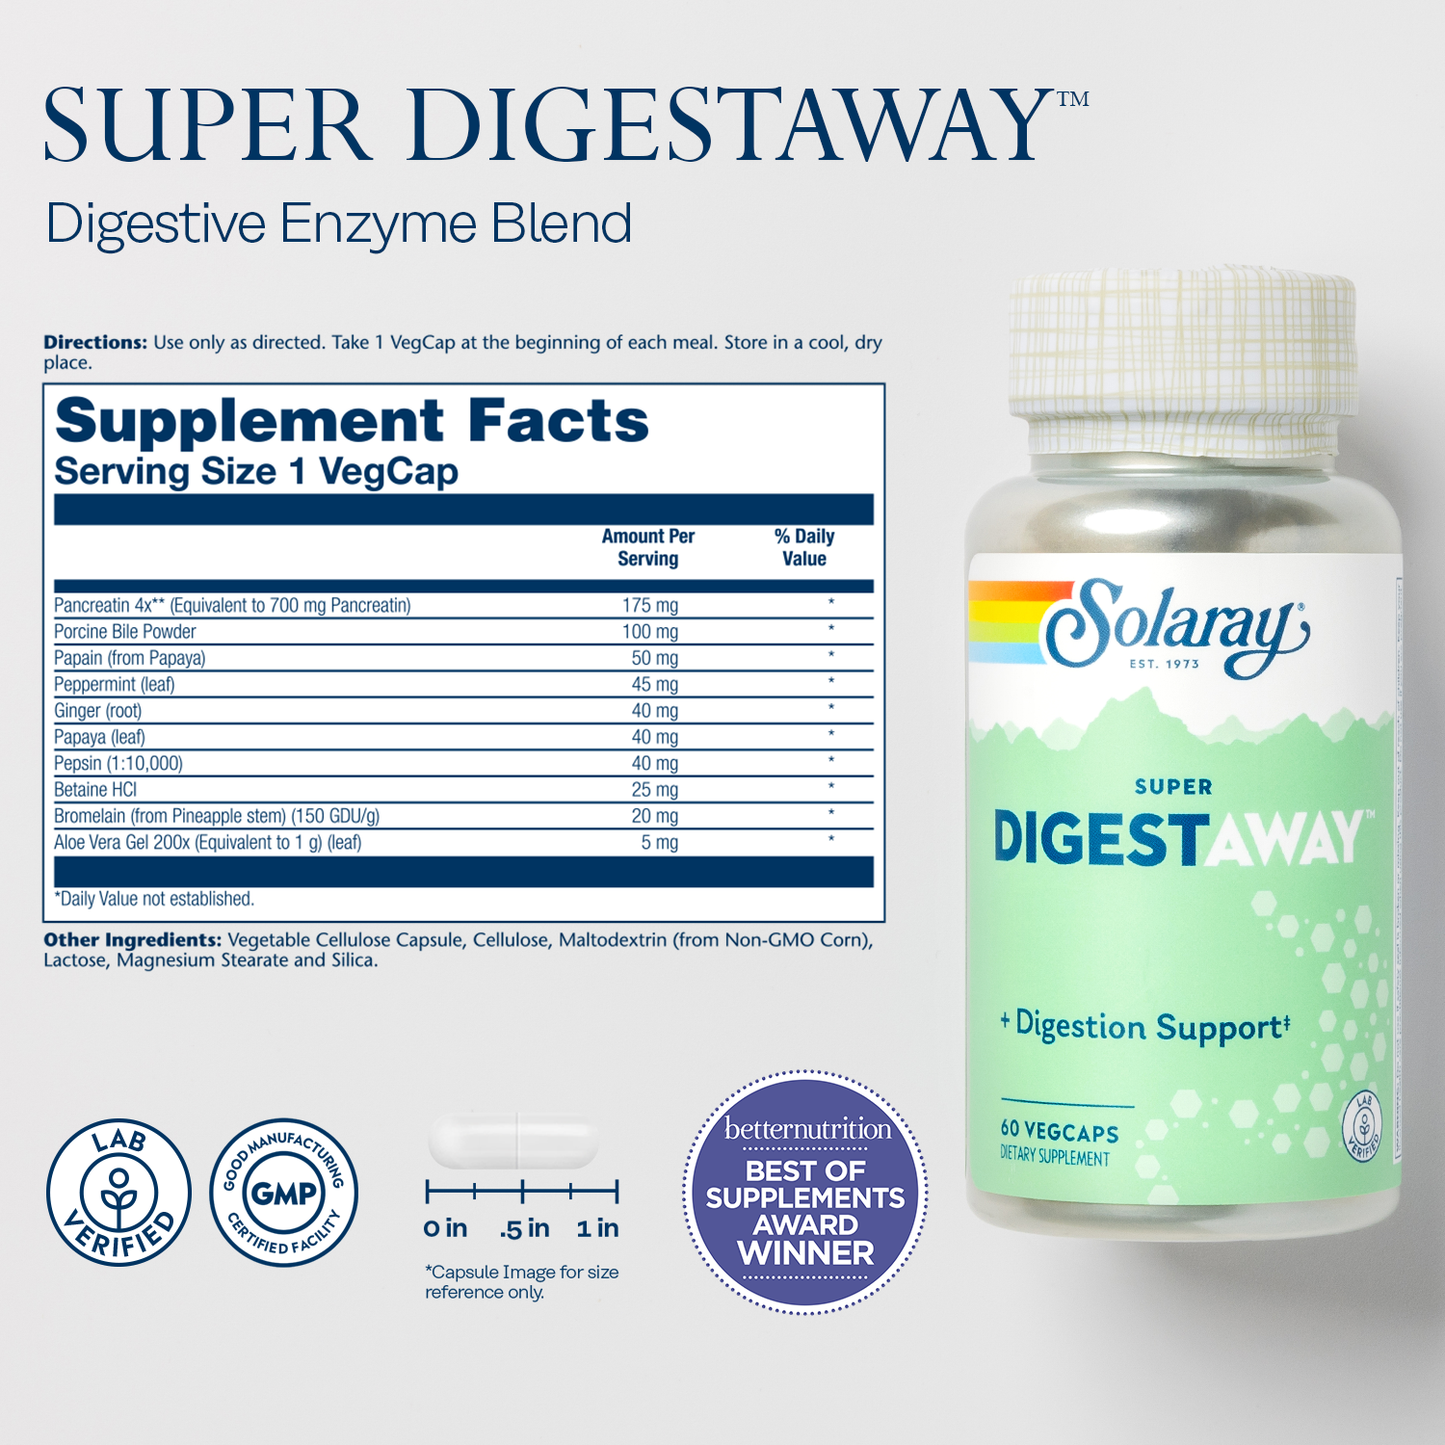 Solaray Super Digestaway Digestive Enzymes - Pancreatin, Papain, Ginger, Pepsin, Betaine HCl, Aloe Vera, and More - Digestion & Nutrient Absorption Support - Lab Verified